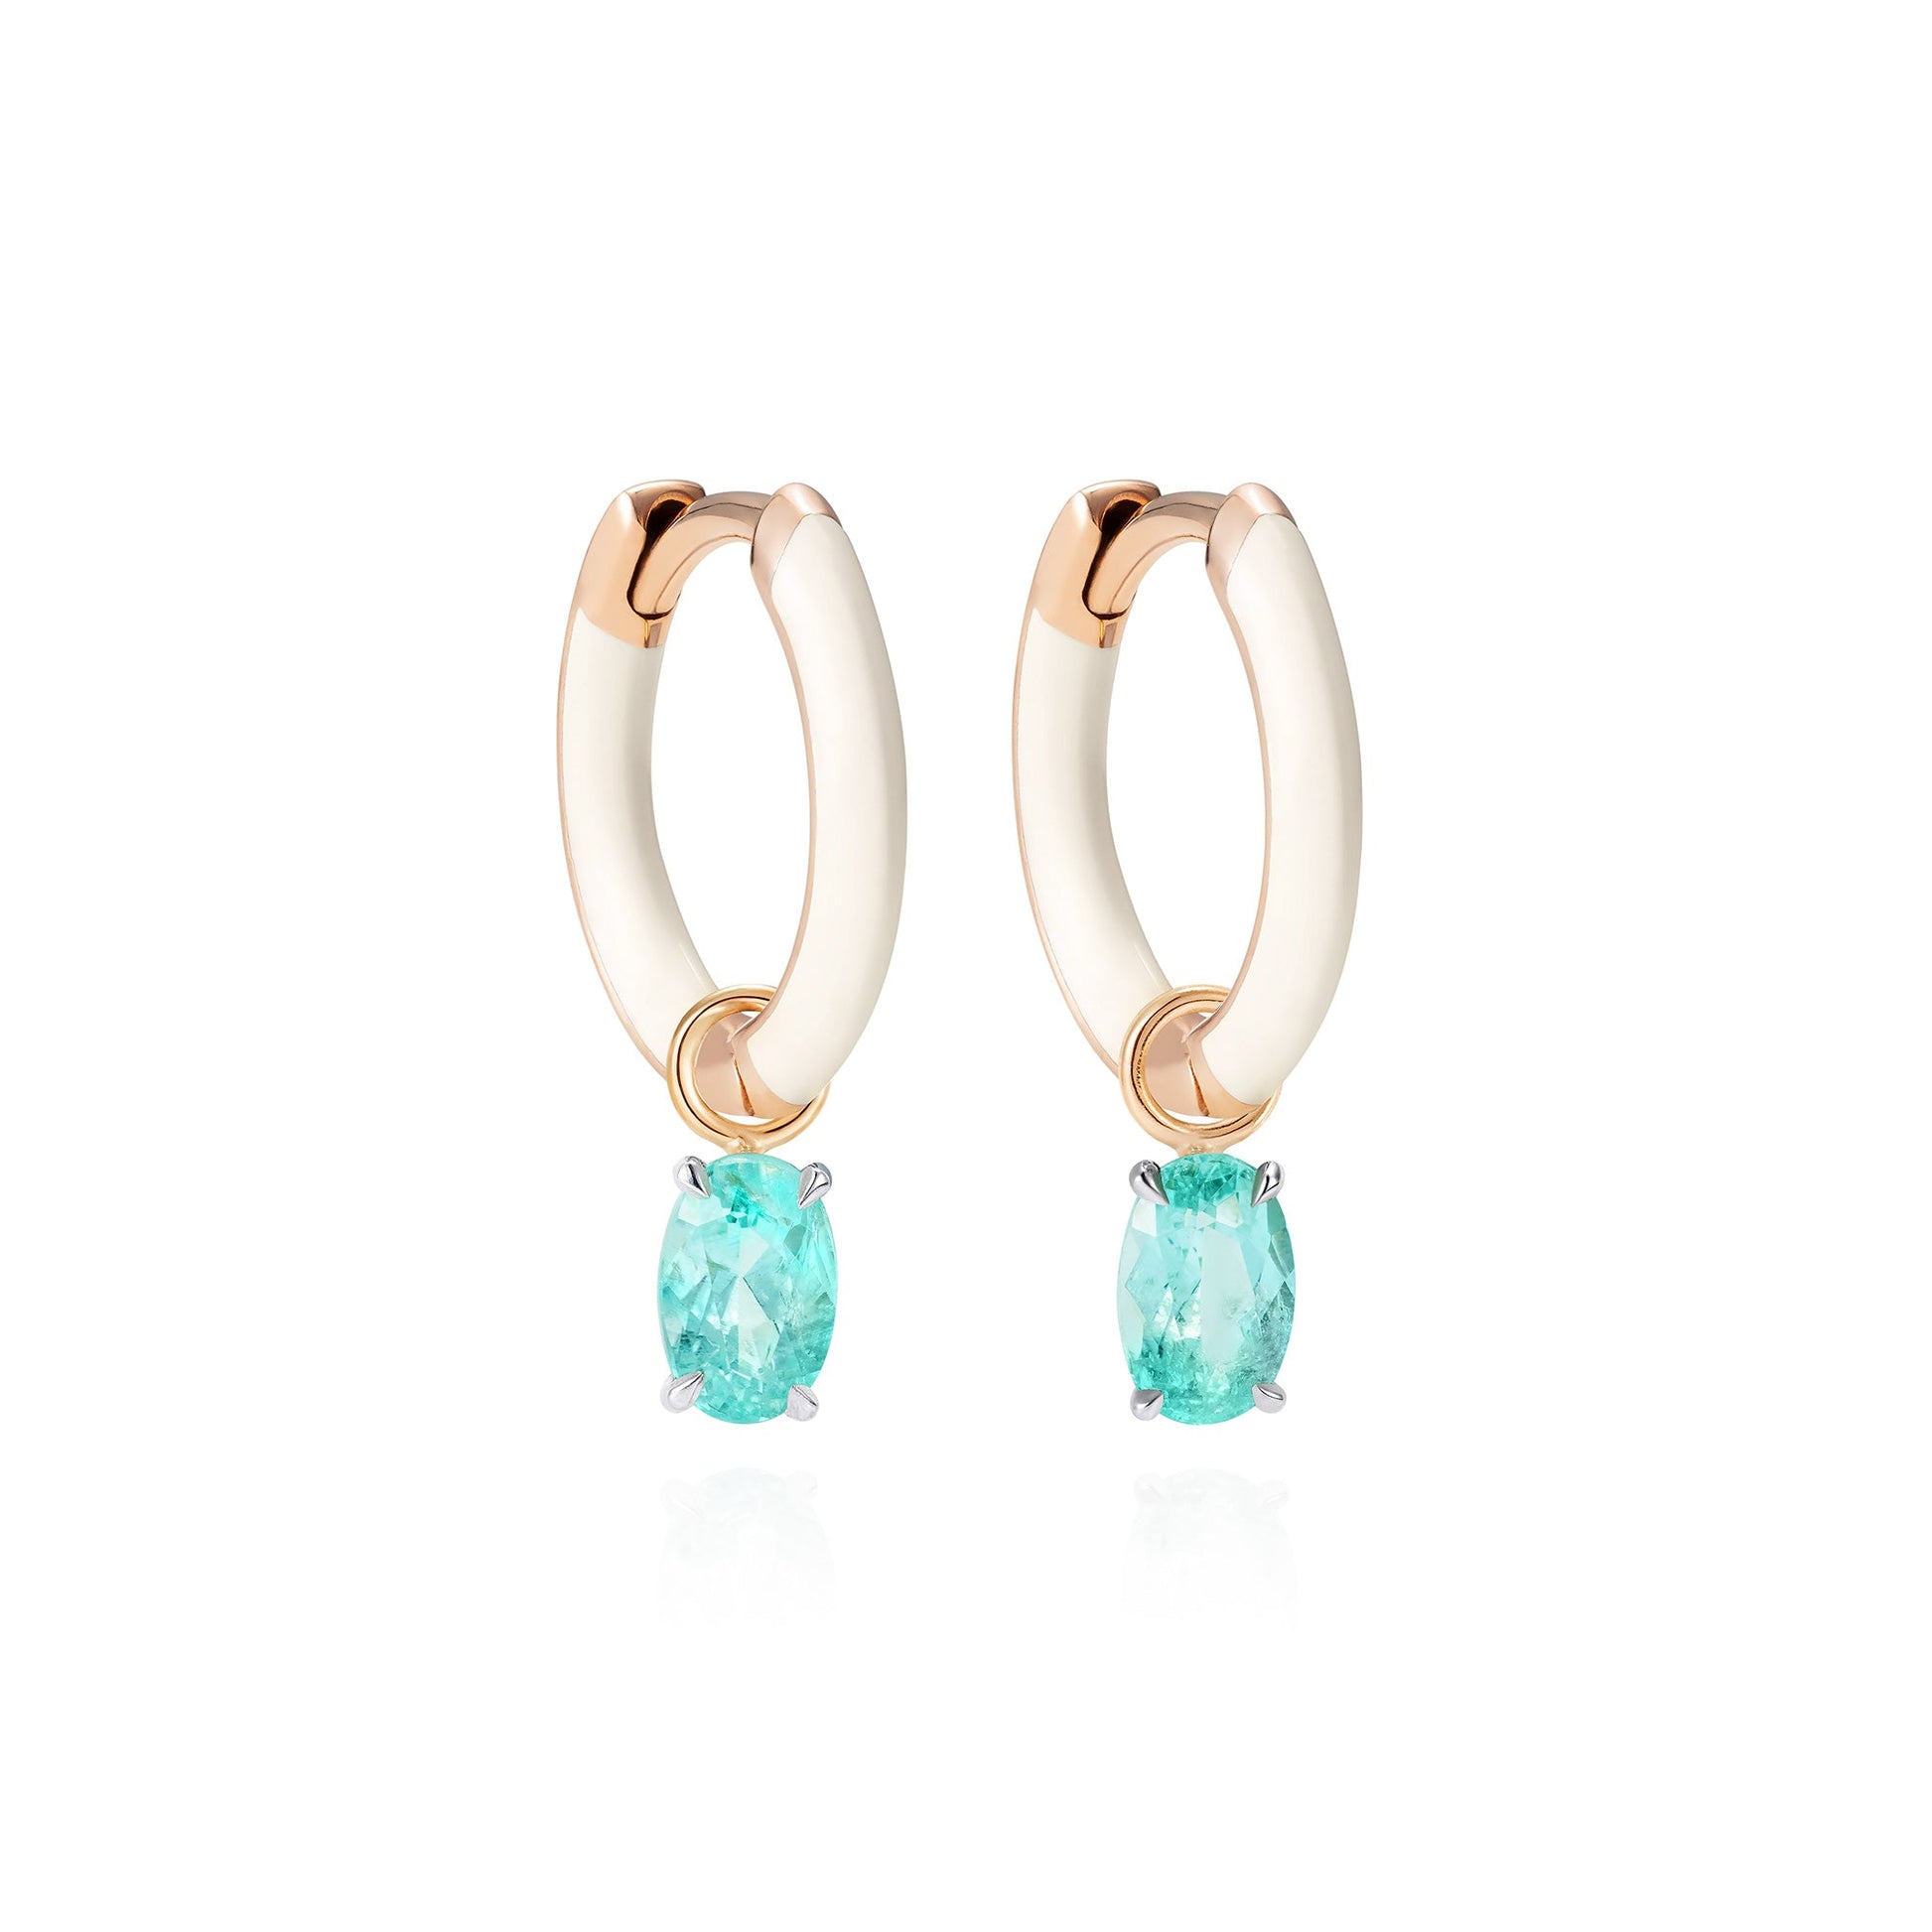 White ceramic and 18K rose gold Mini hoops with oval paraiba tourmalines - Ines Nieto London